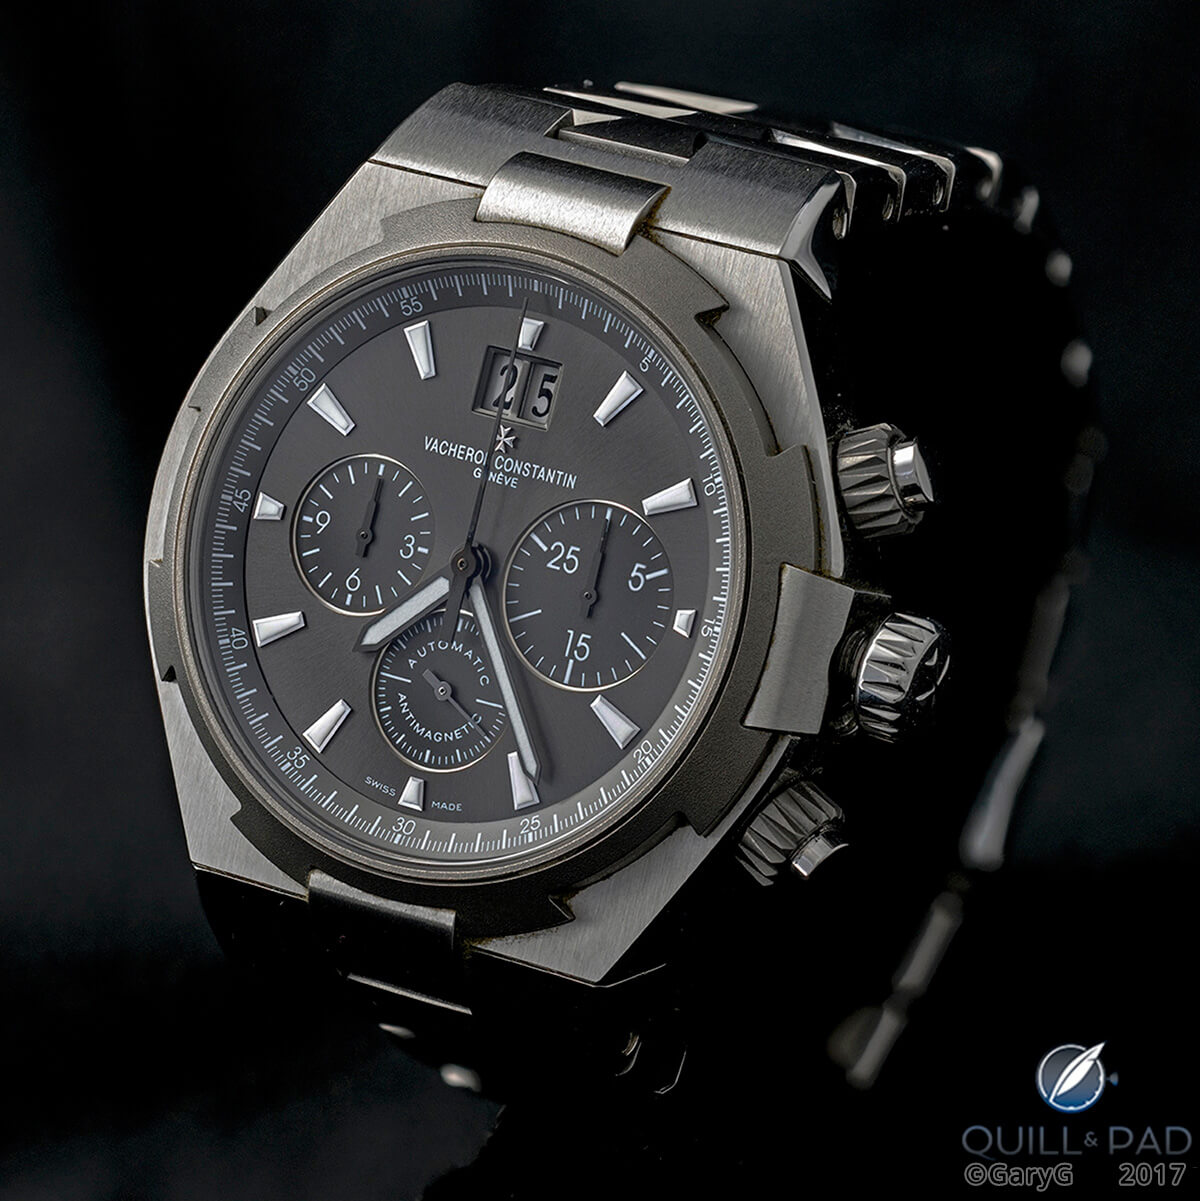 Vacheron Constantin Overseas Chronograph with movement based on the Victorin Piguet/Blancpain Caliber 1185